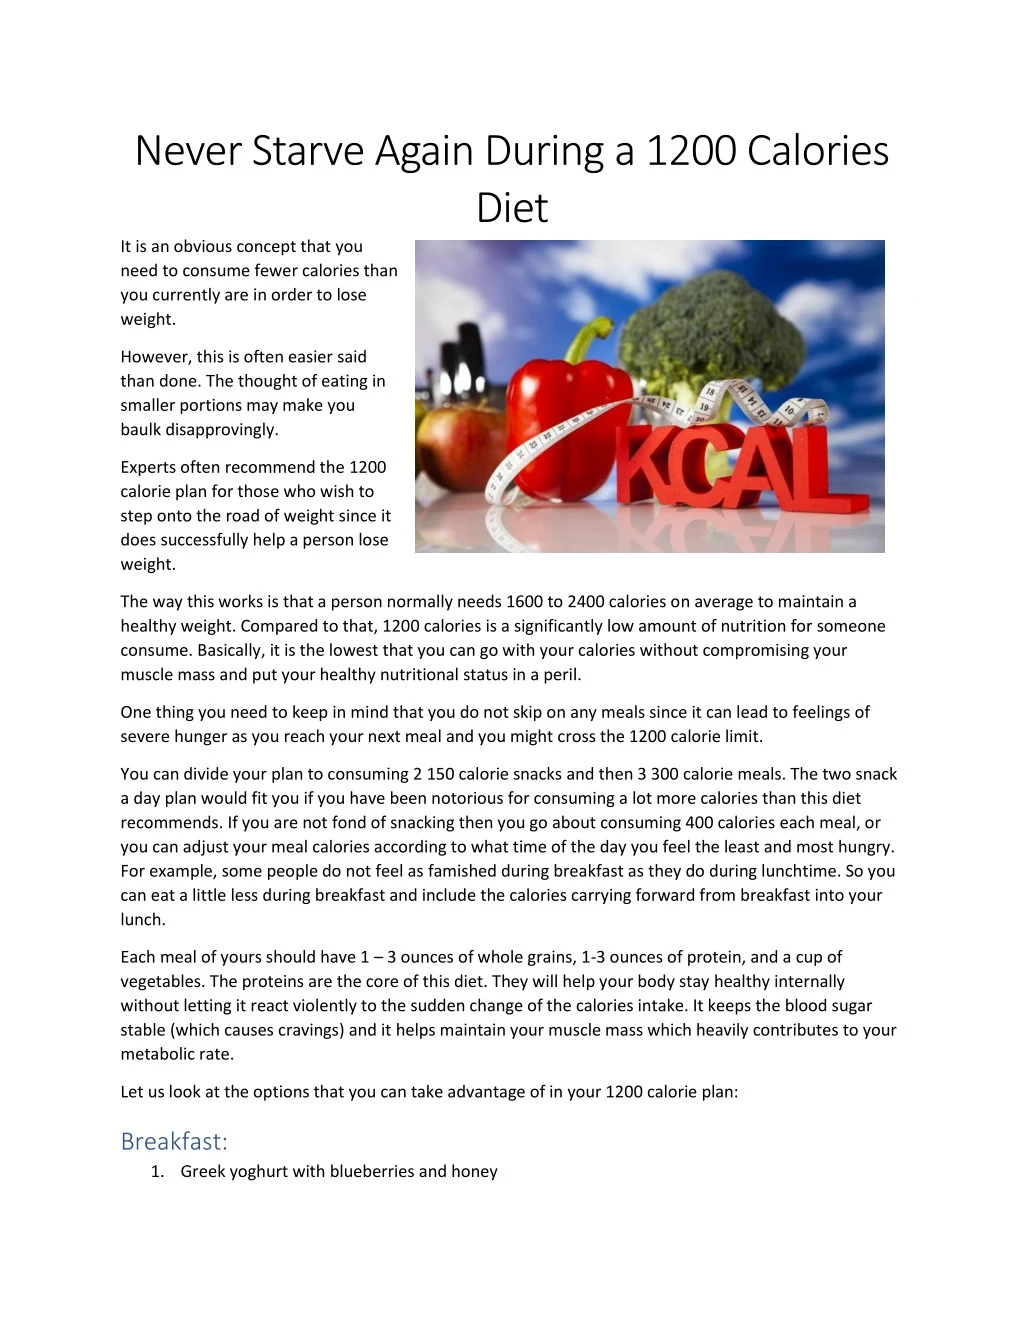 never starve again during a 1200 calories diet